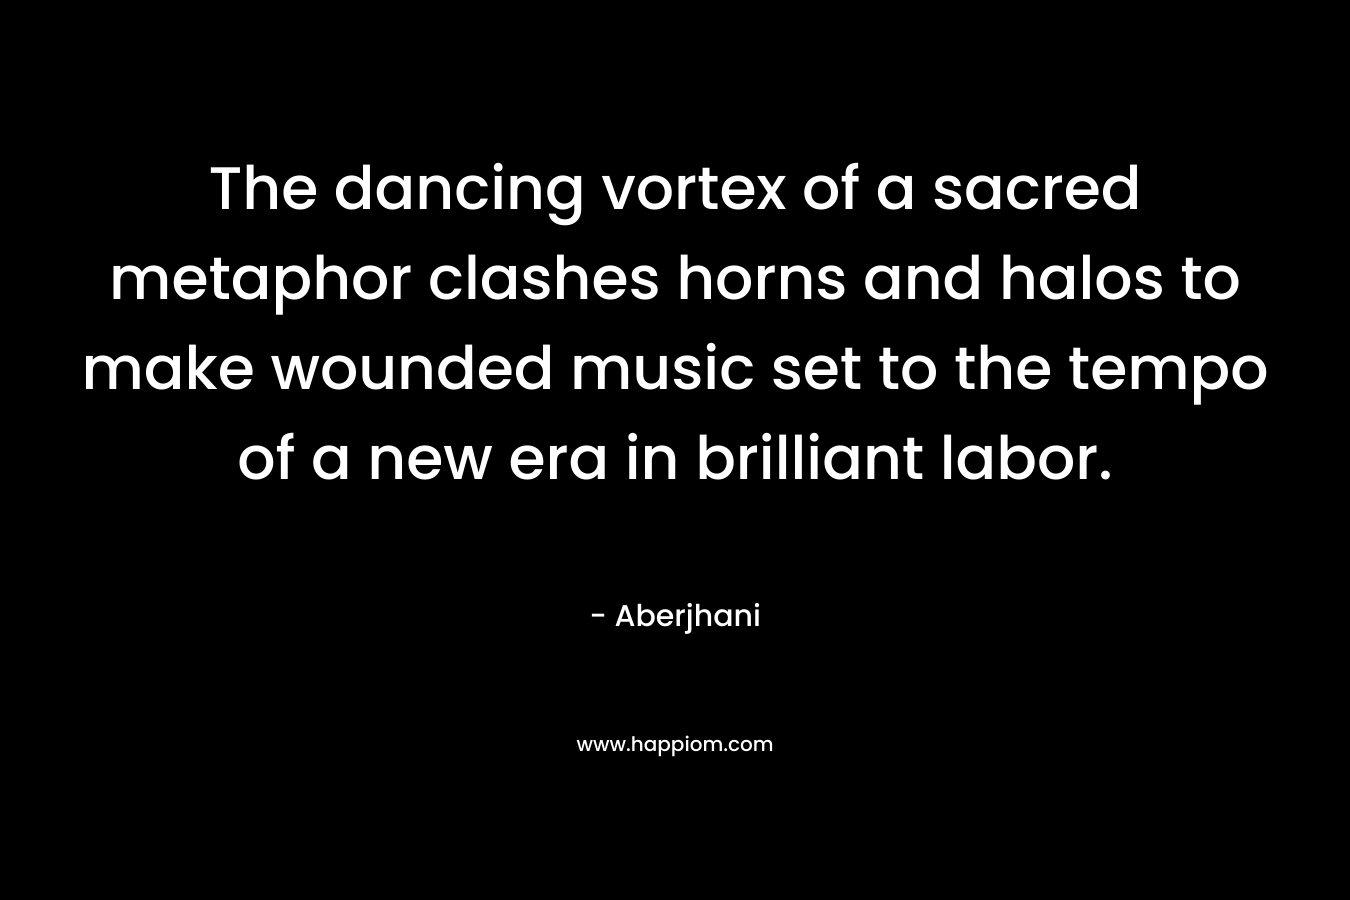 The dancing vortex of a sacred metaphor clashes horns and halos to make wounded music set to the tempo of a new era in brilliant labor. – Aberjhani